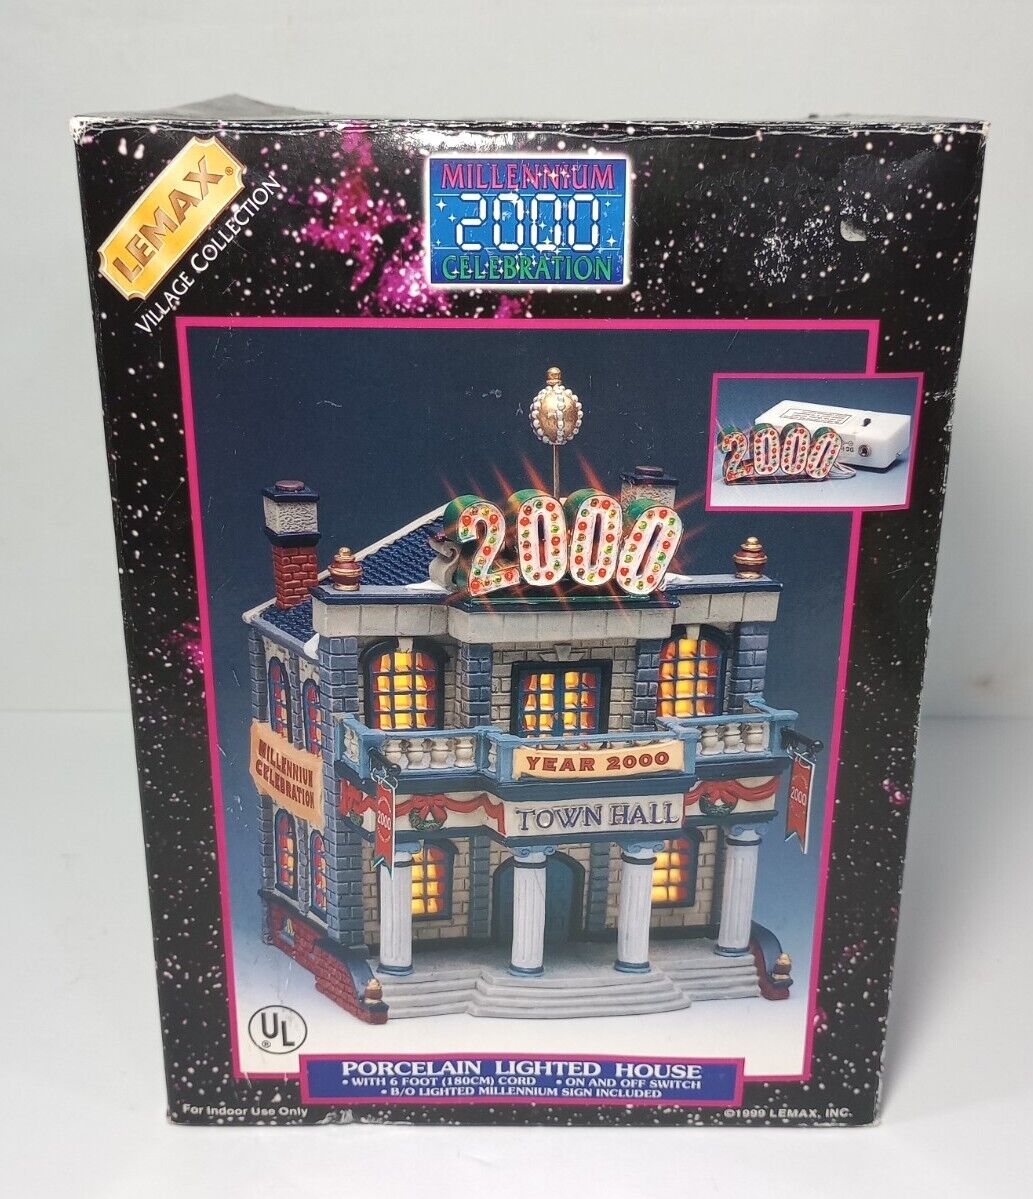 Lemax Year 2000 Town Hall Millennium Celebration Christmas Lighted House NEW